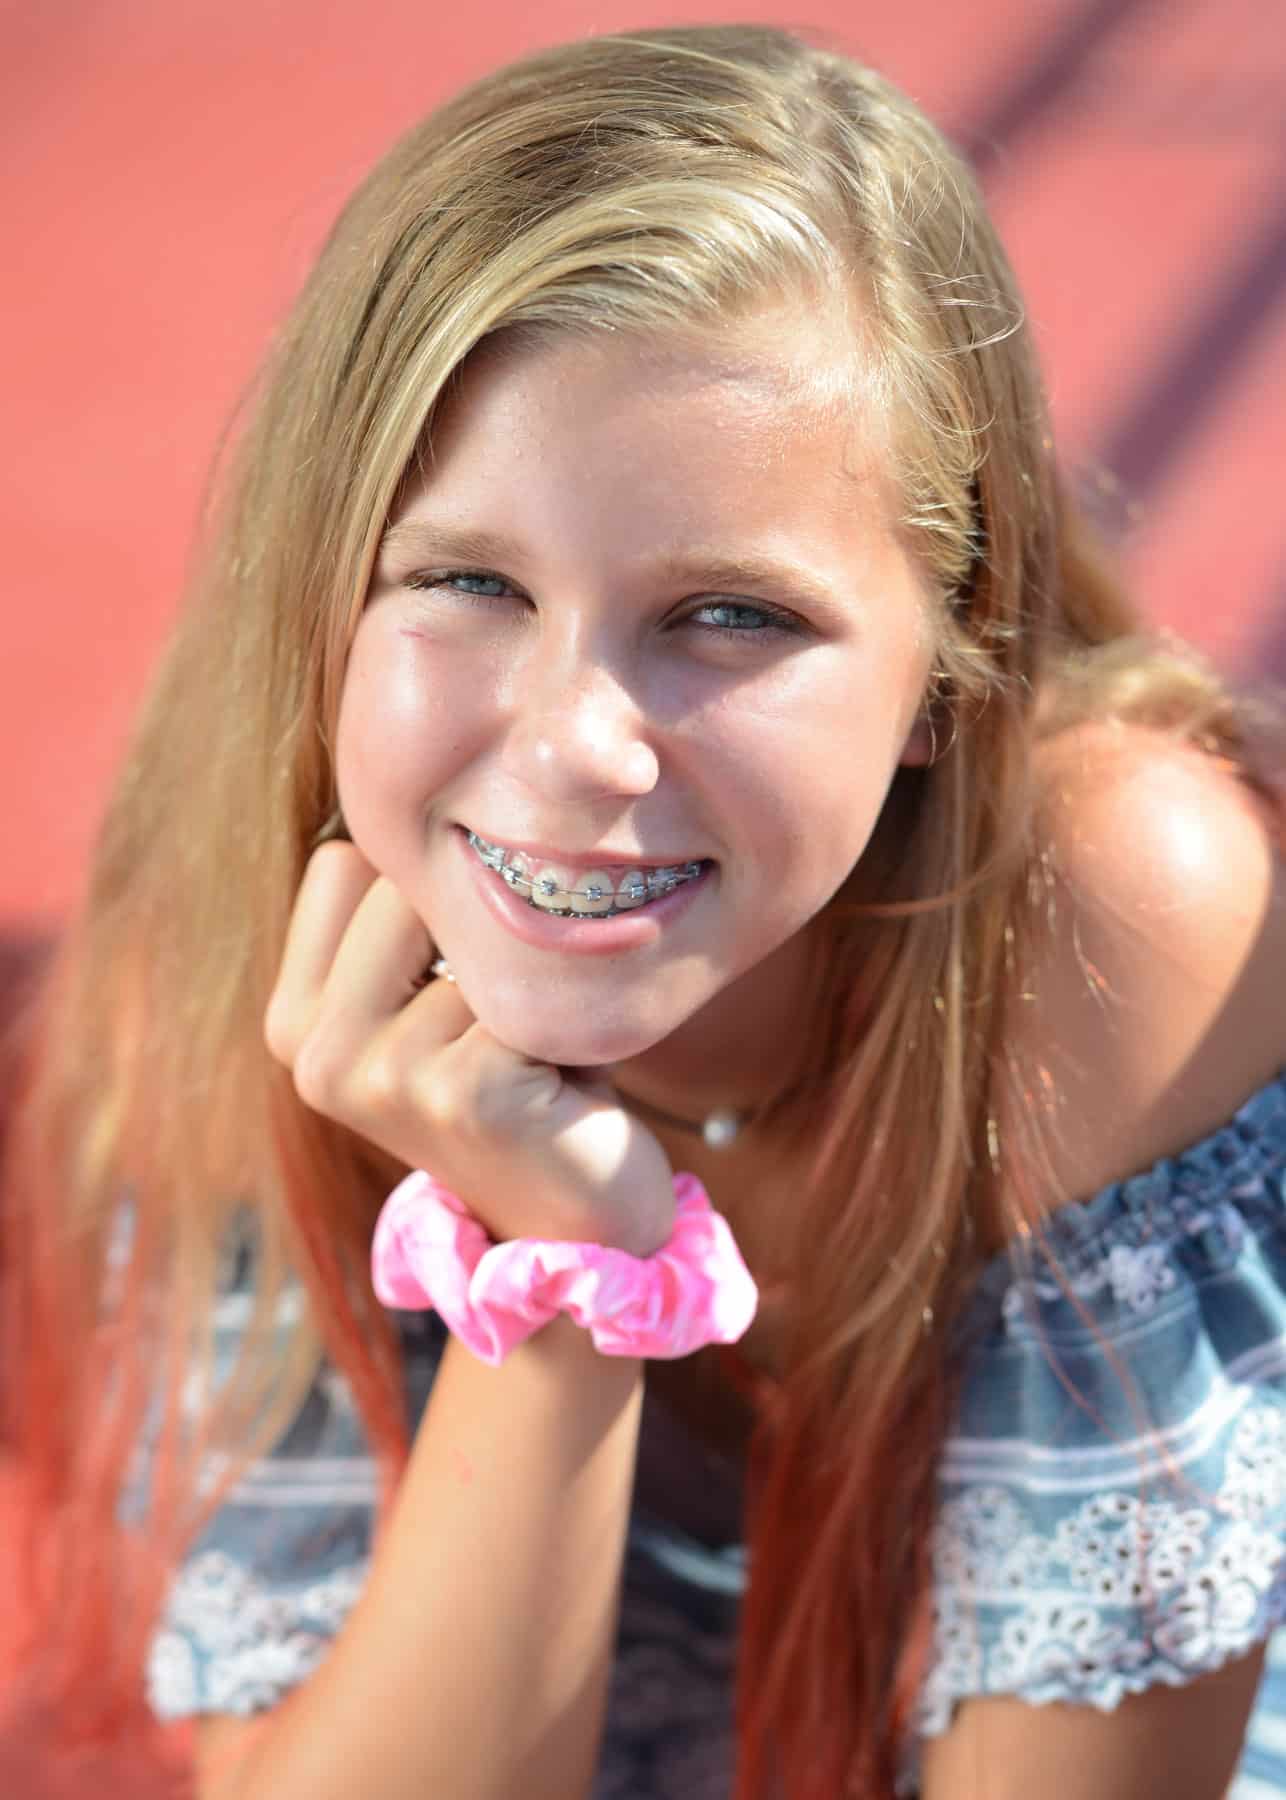 A blonde teenage girl smiling with braces on.